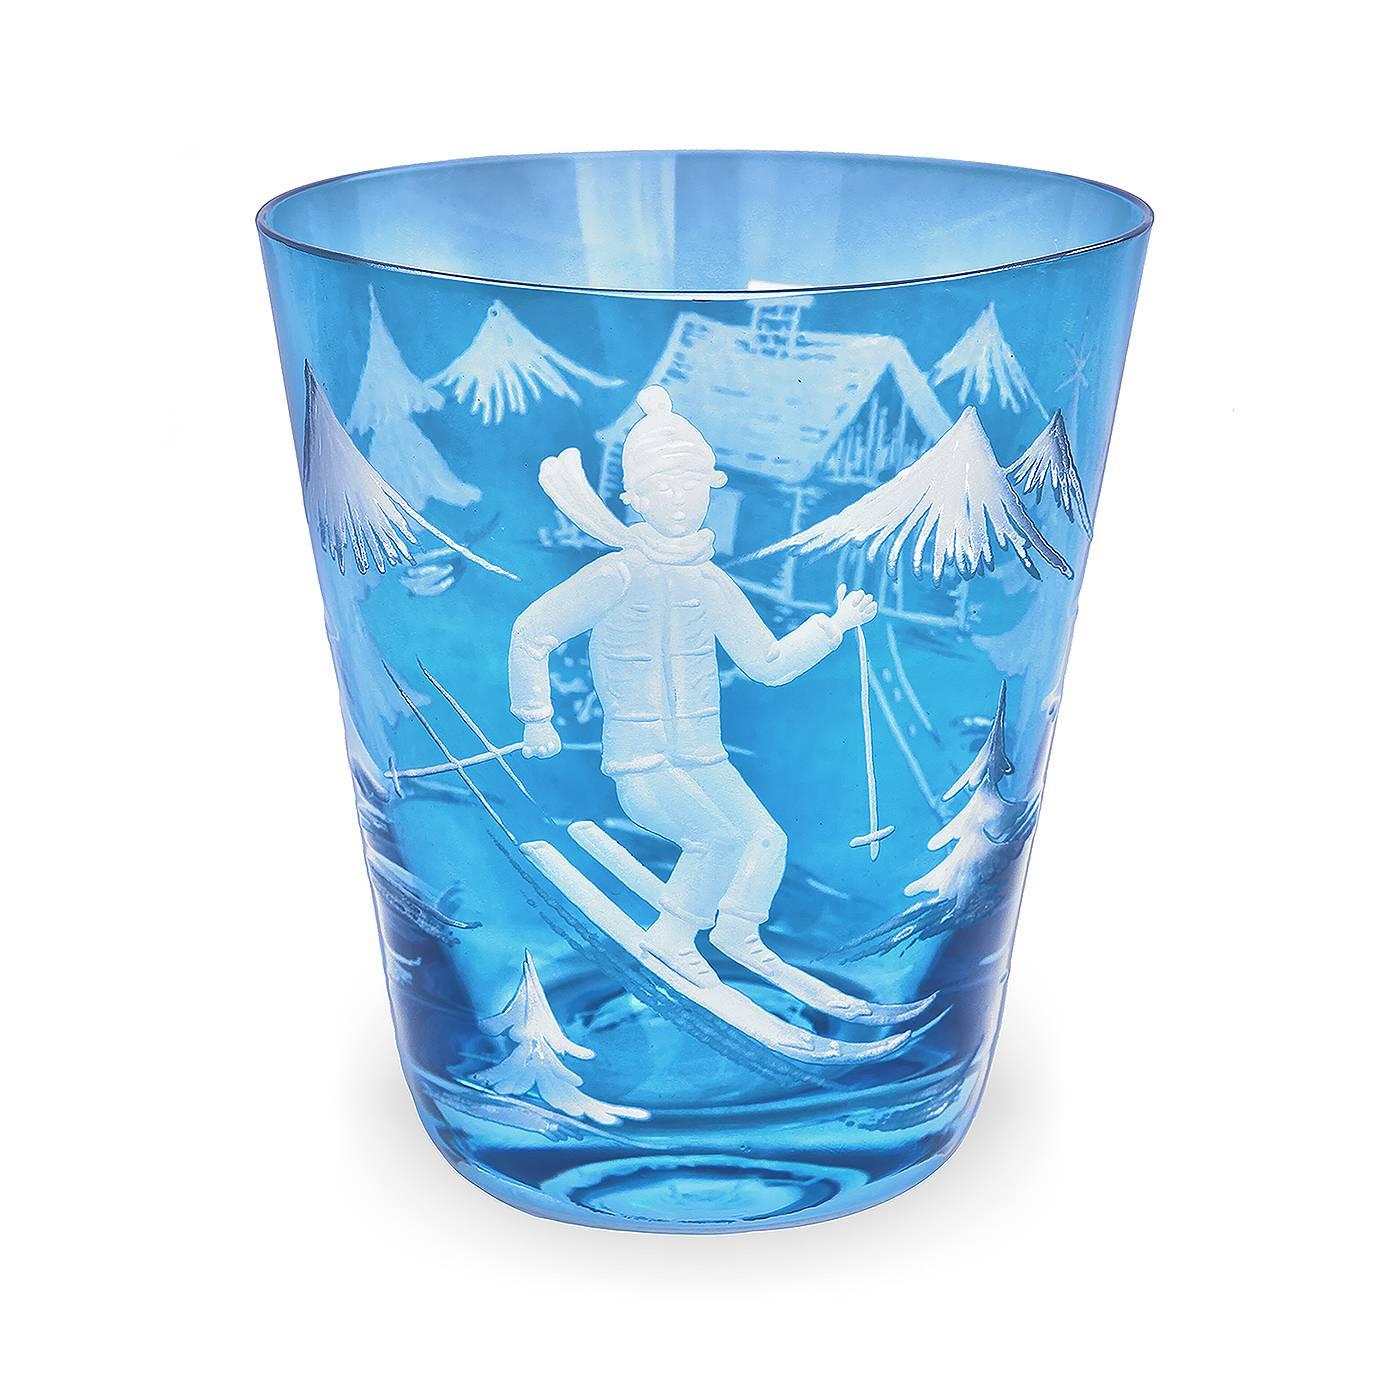 Hand-blown carafe in blue crystal with a charming skier decor. All around hand-engraved skier decor with trees, house and the skier. A matching tumbler and votiv is available in the same color
About sofina crystal:
 Sofina crystal was established in